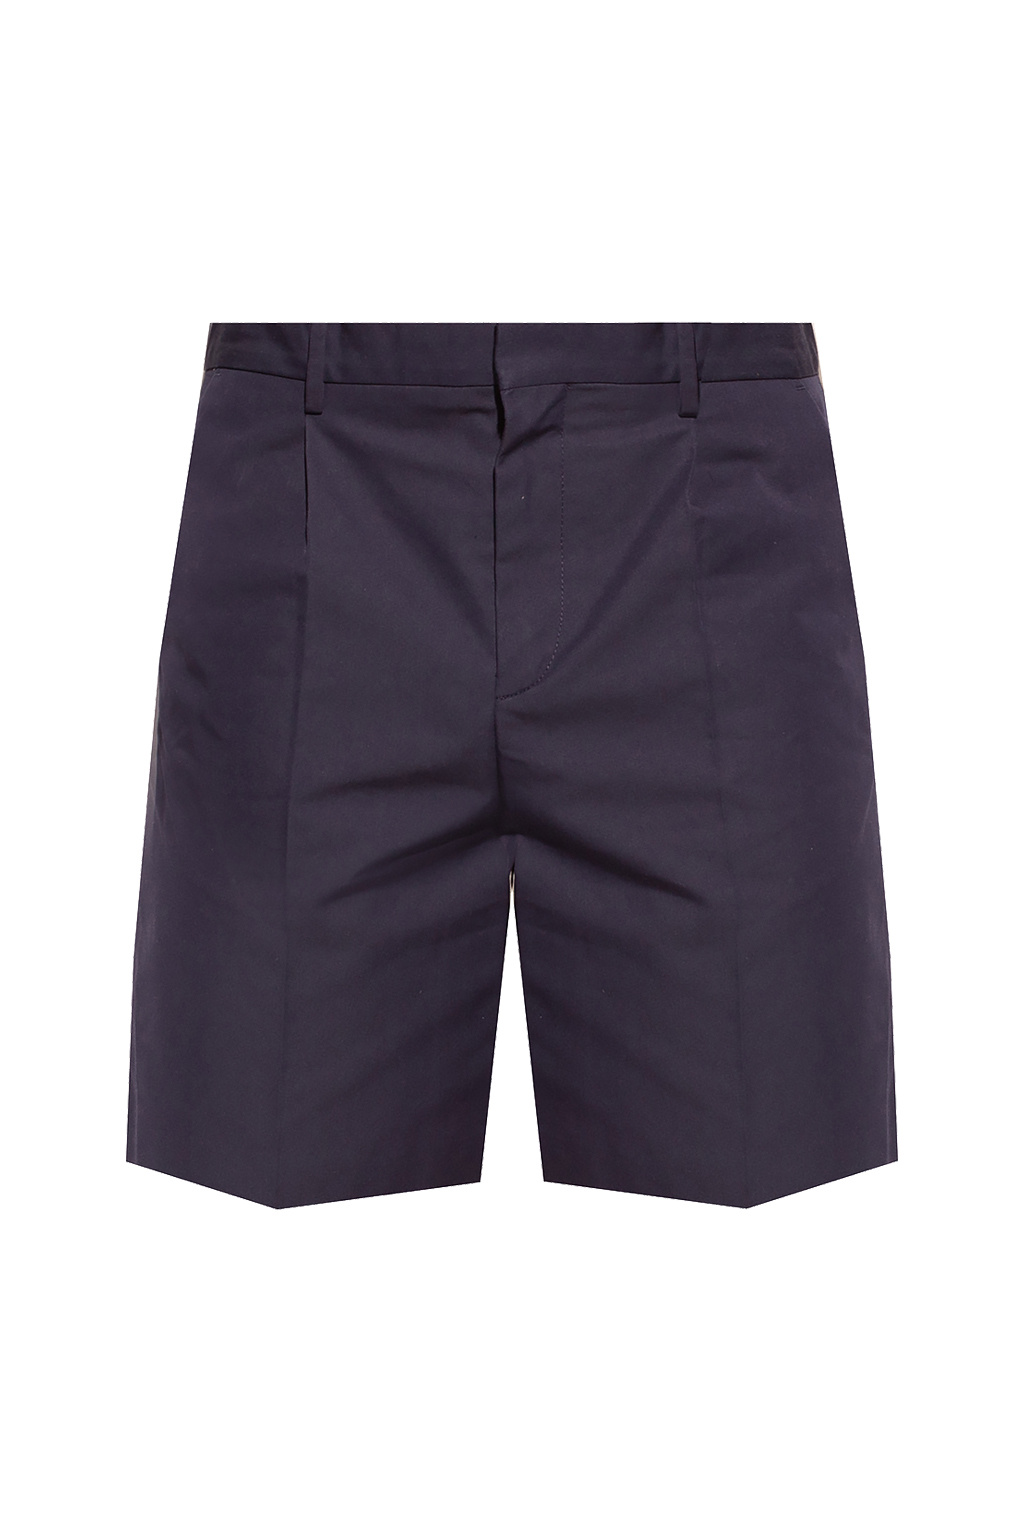 A.P.C. Pleat-front trousers